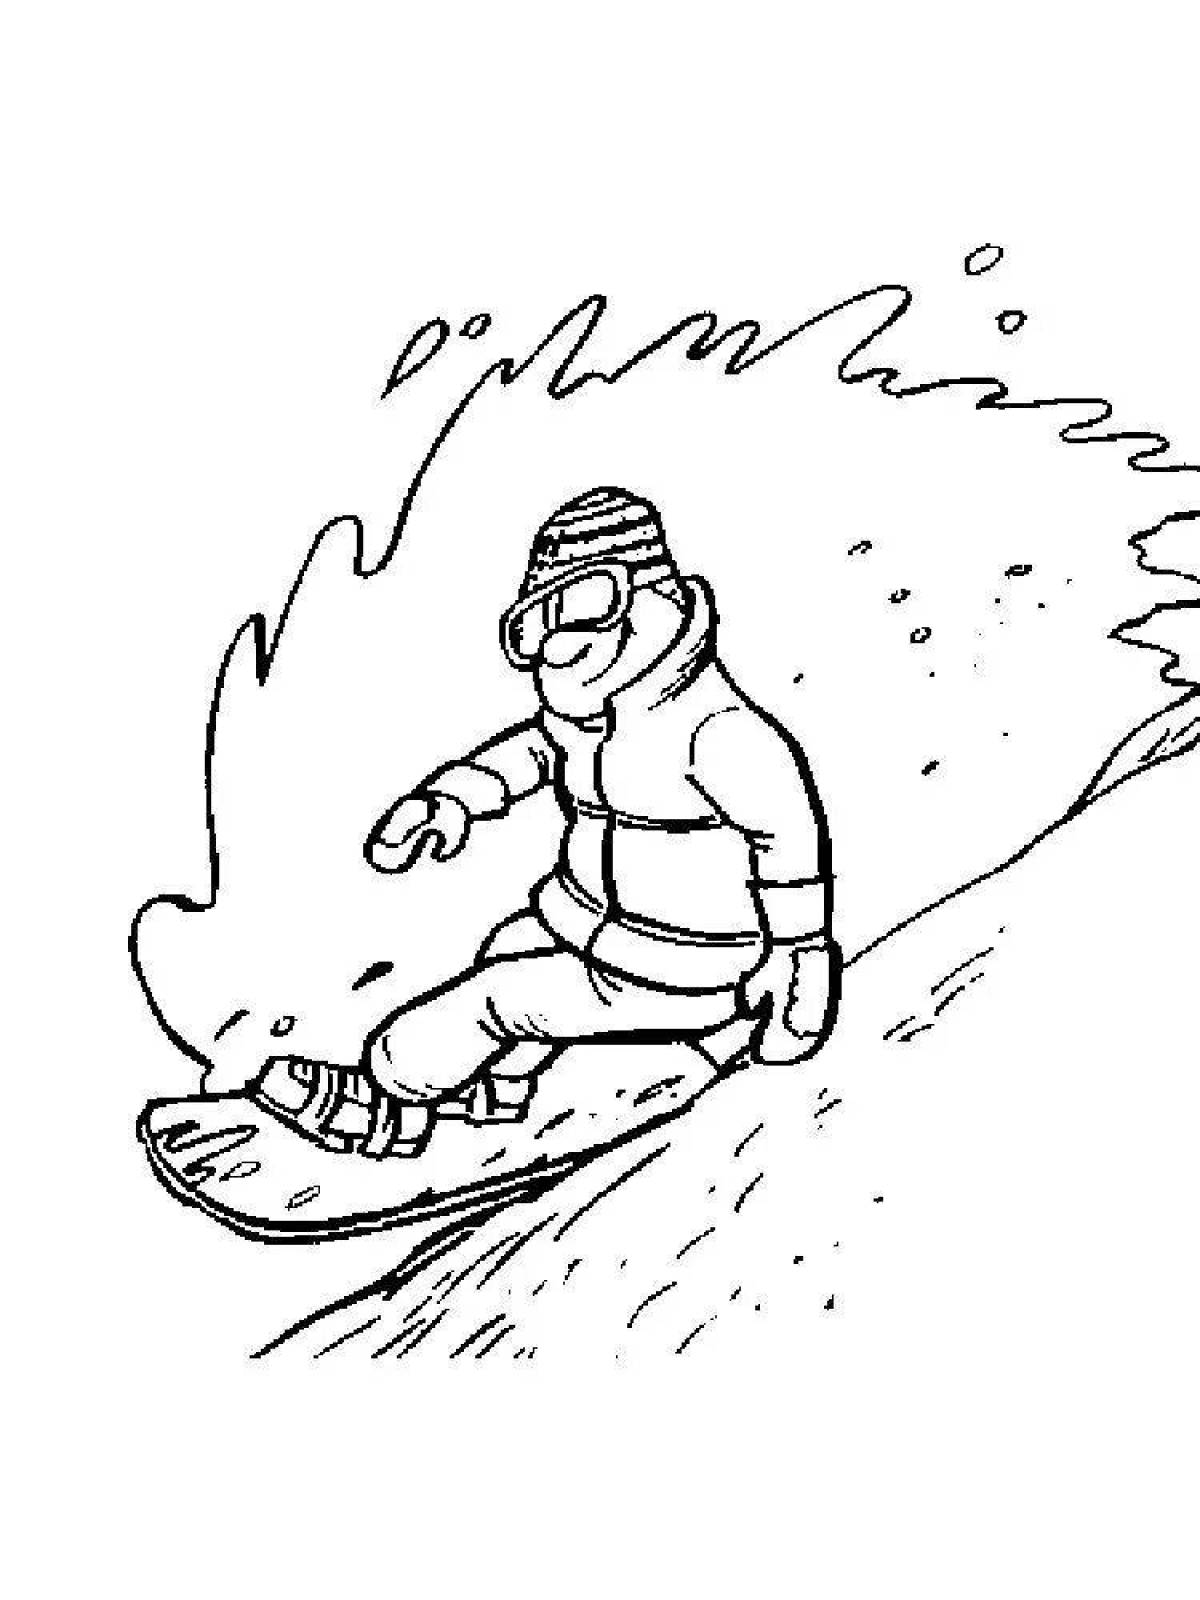 Generous snowboard coloring page